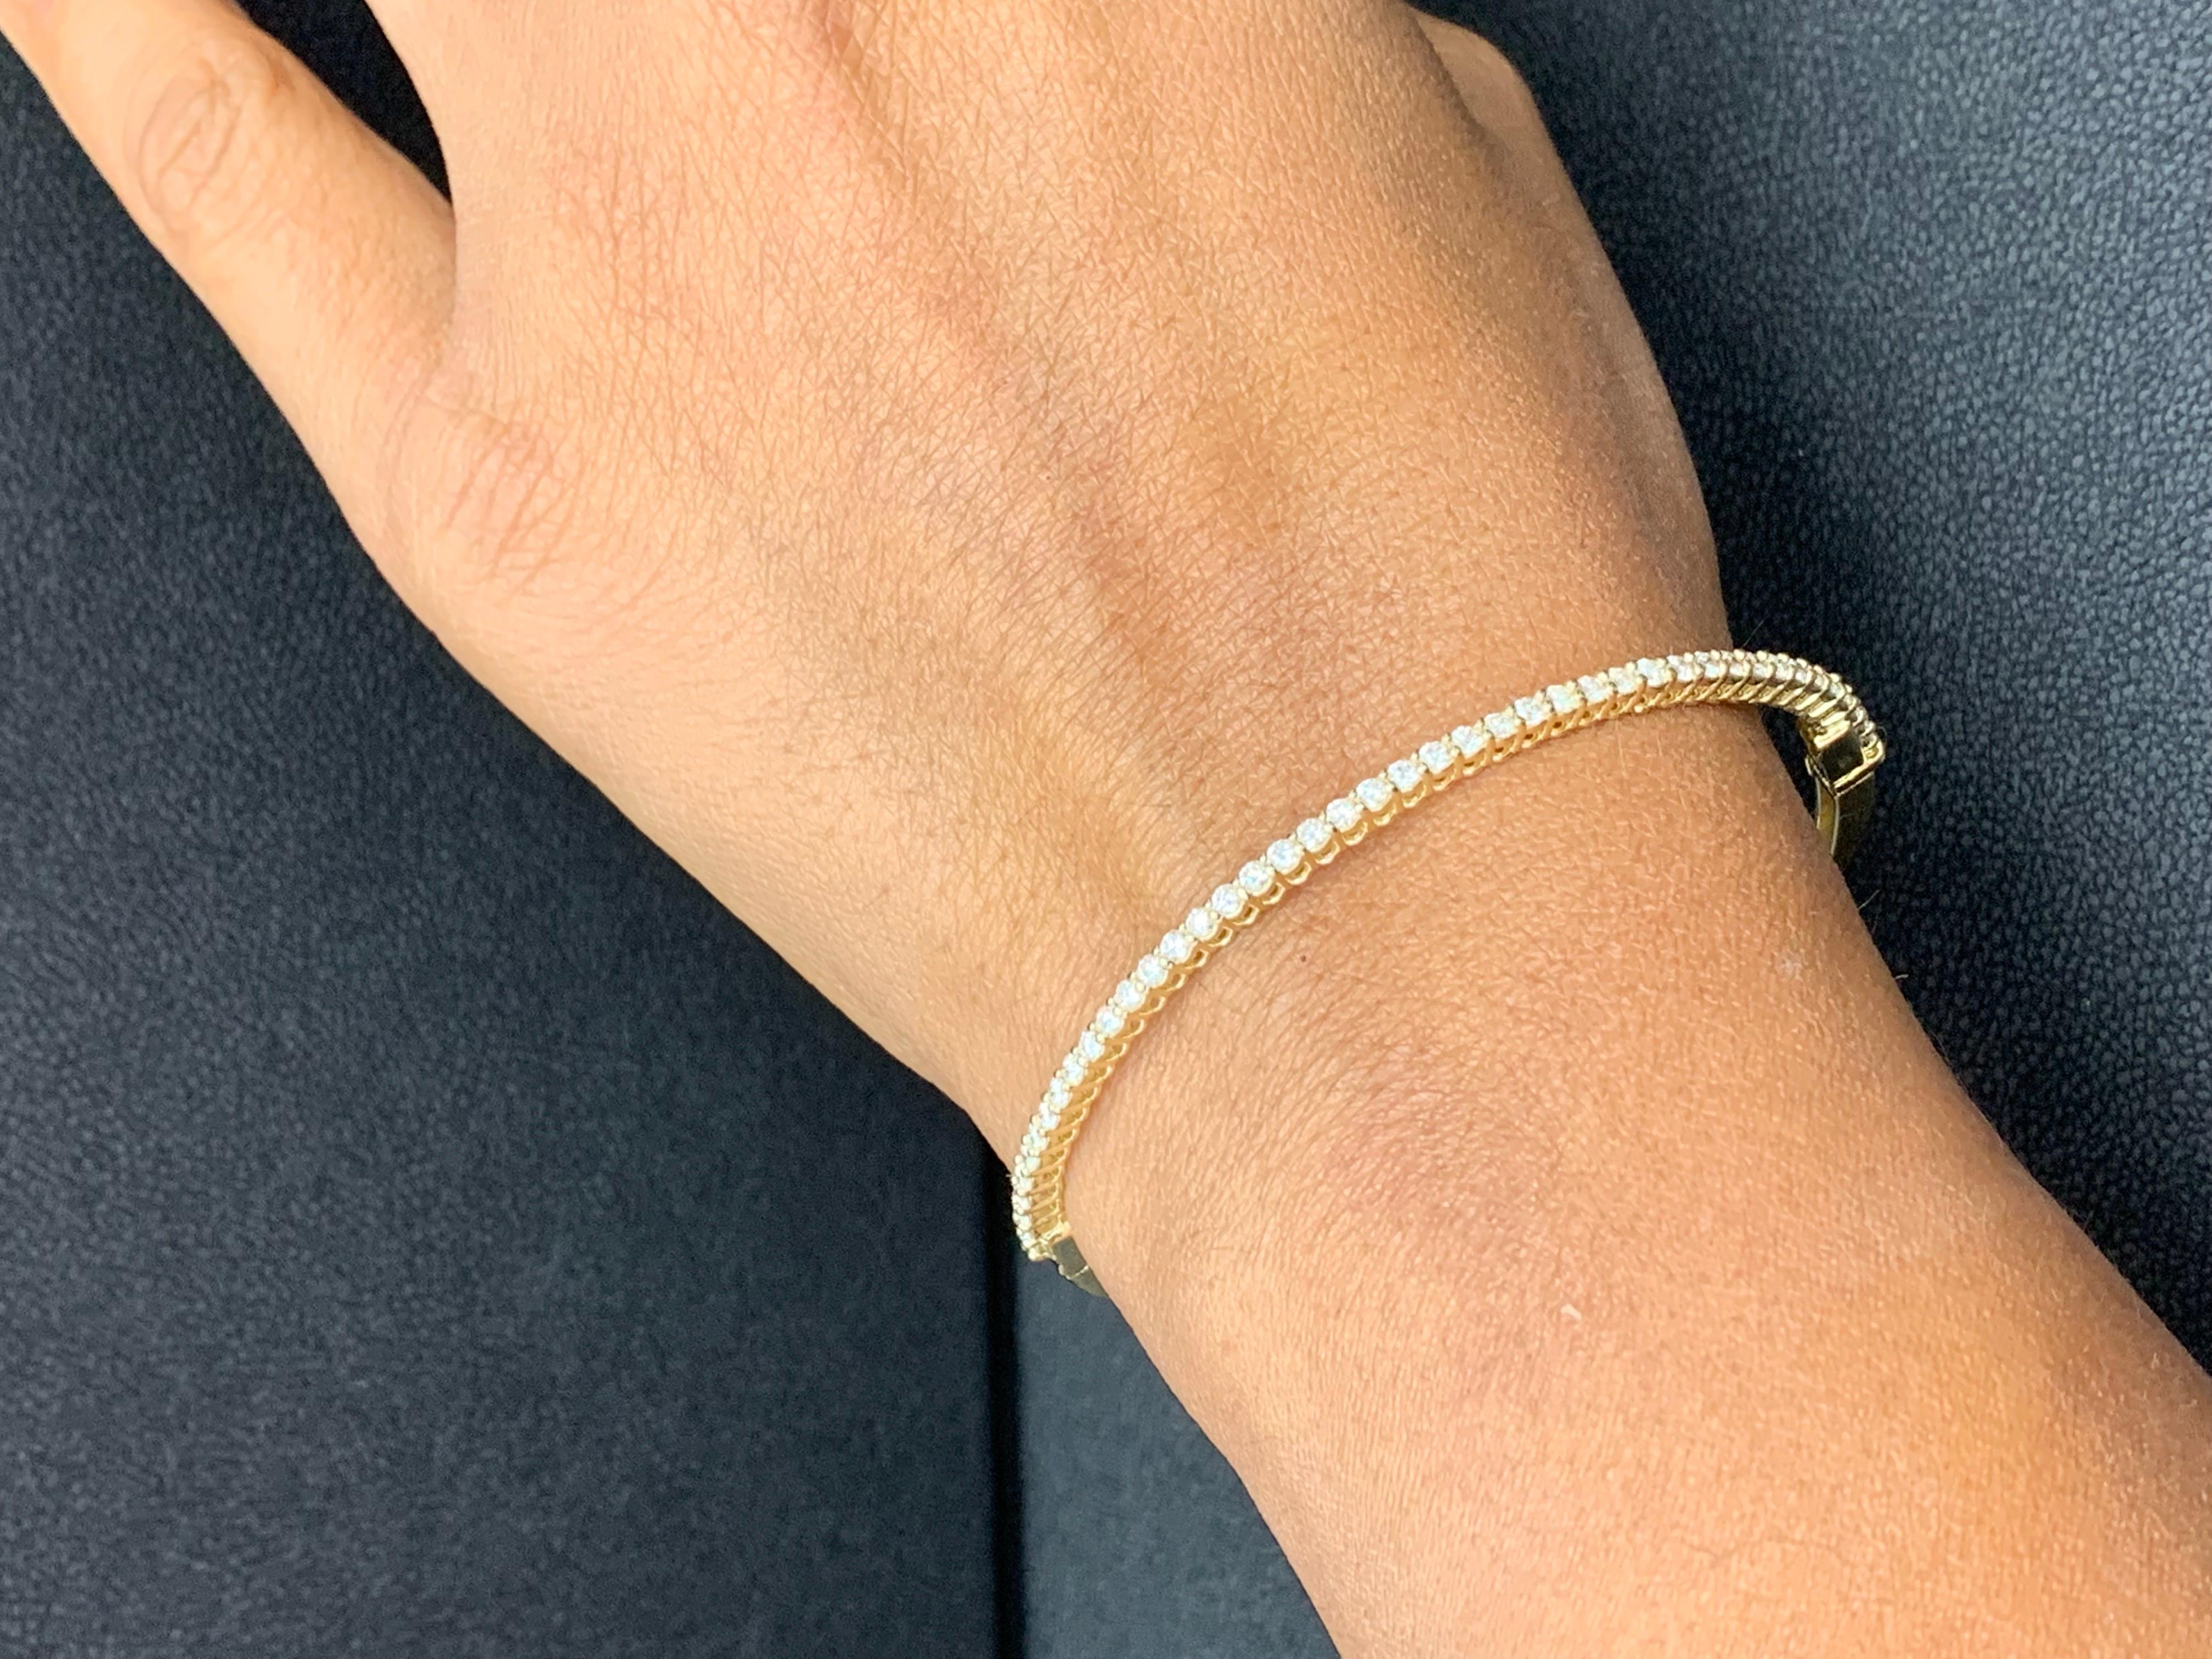 A simple but elegant bangle bracelet set with 39 round-cut diamonds weighing 1.01 carats total. Has a clasp to slip and wear the bangle securely. Made in 14k Yellow Gold.

Style available in different price ranges. Prices are based on your selection